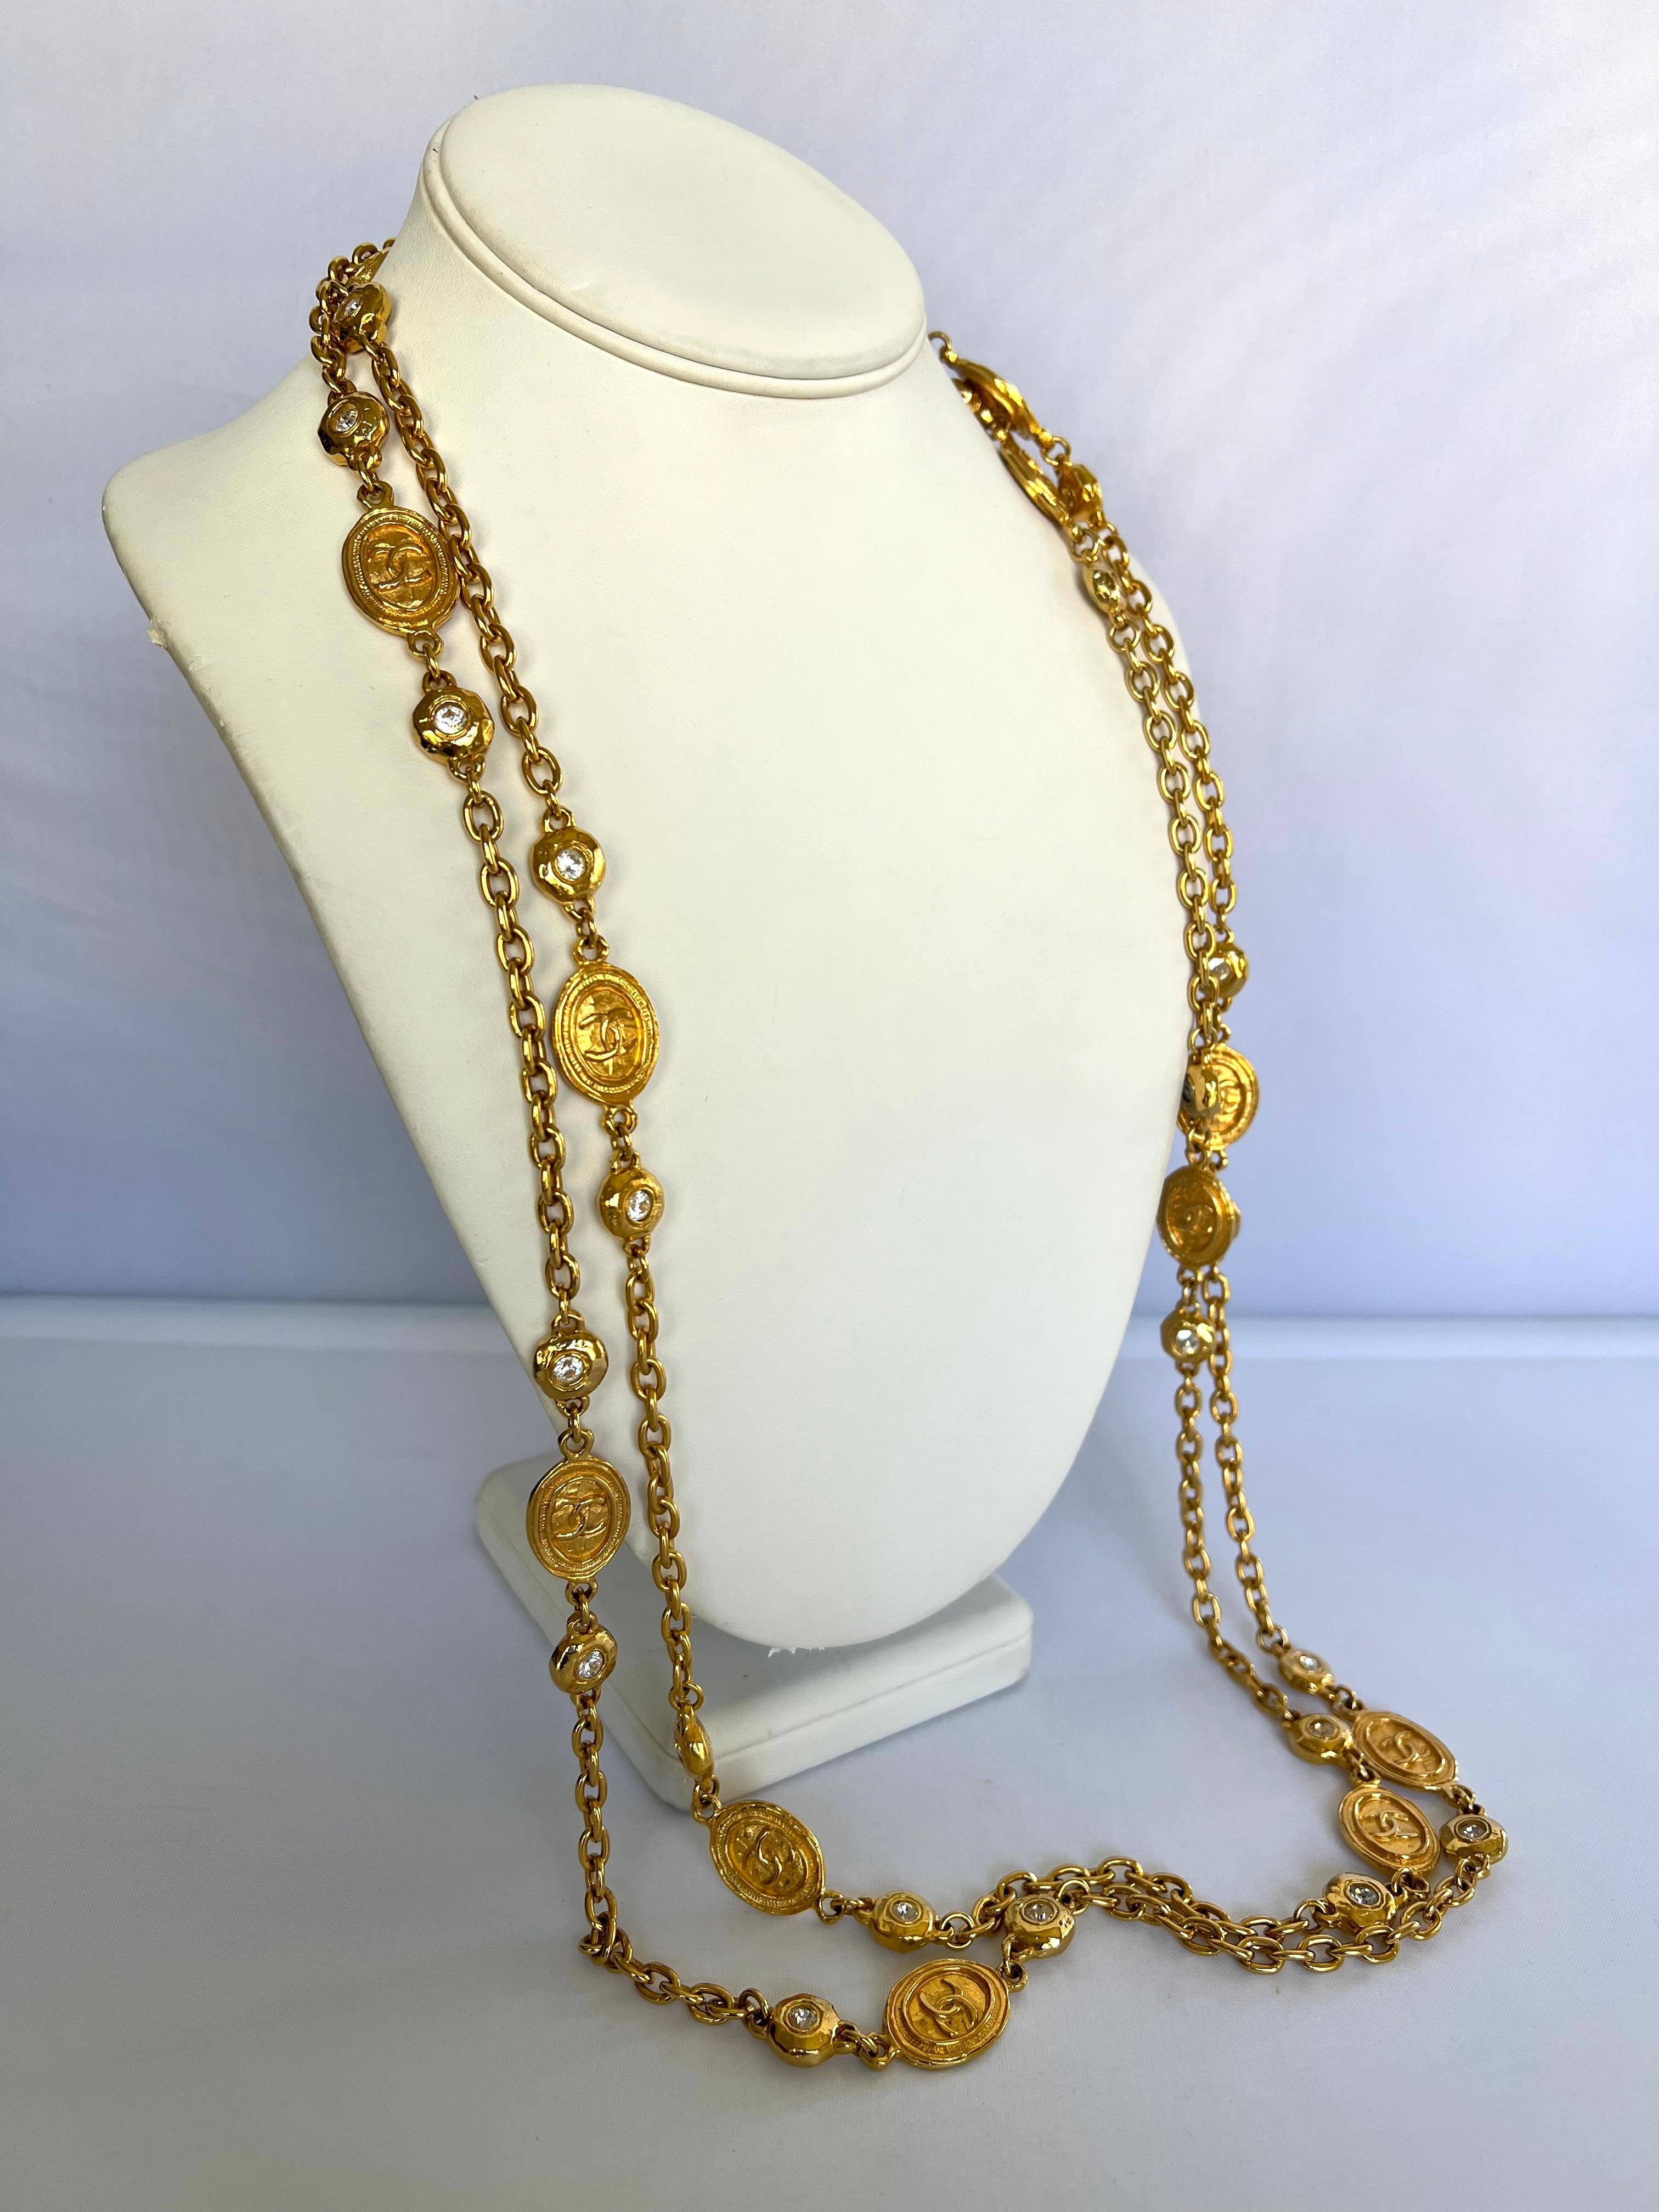 Vintage Chanel Mademoiselle Gilt Station Necklace  In Excellent Condition For Sale In Palm Springs, CA